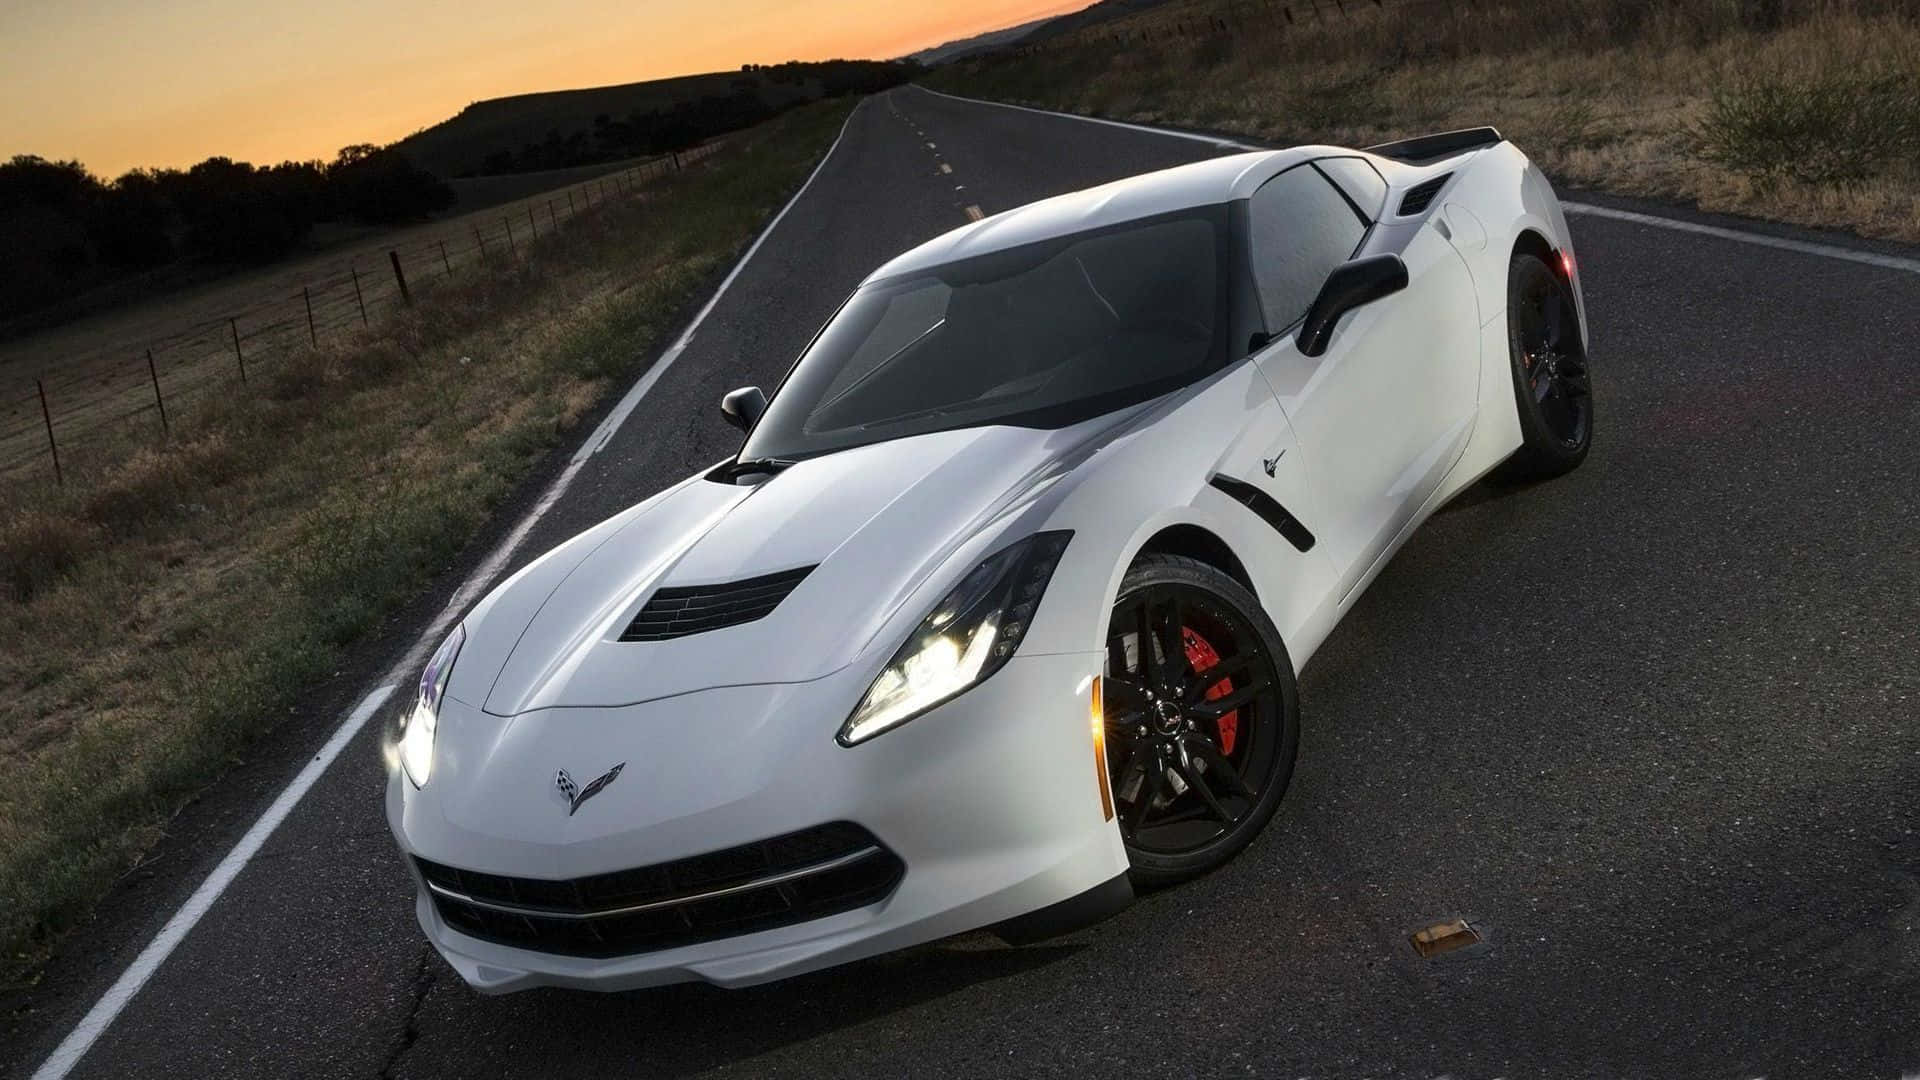 Enjoy the Ride in this Beautiful Corvette